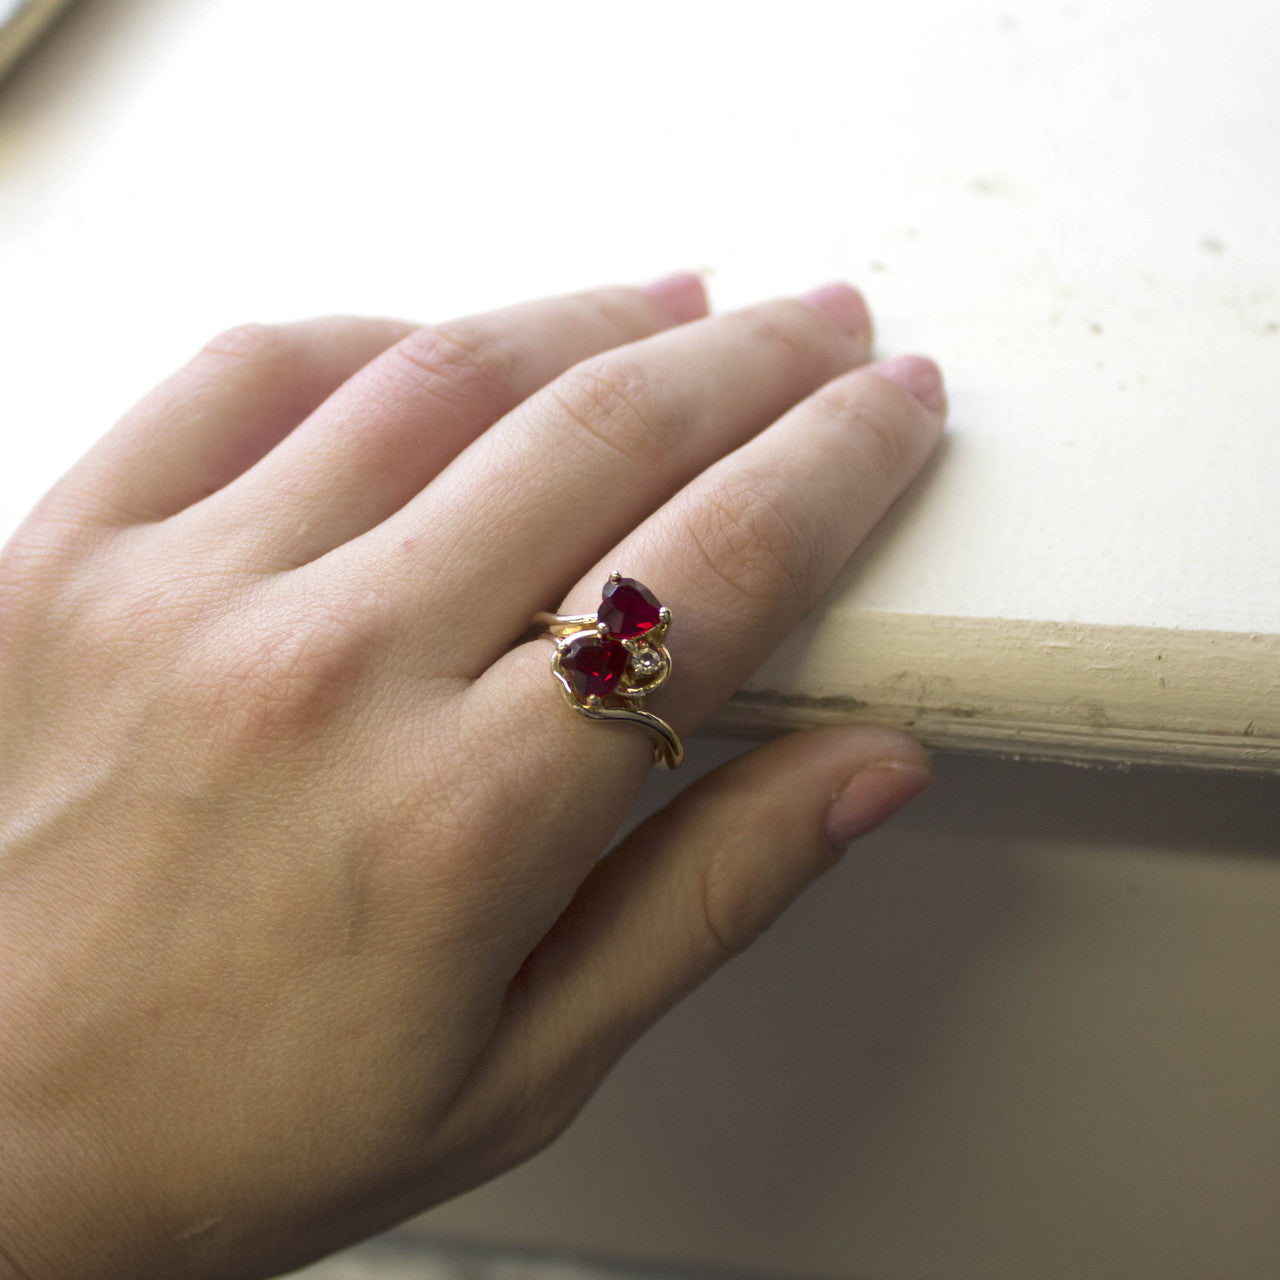 Vintage Ring Ruby Swarovski Crystal Double Heart Ring 18k Gold Antique Womans Handmade Jewelry R2342